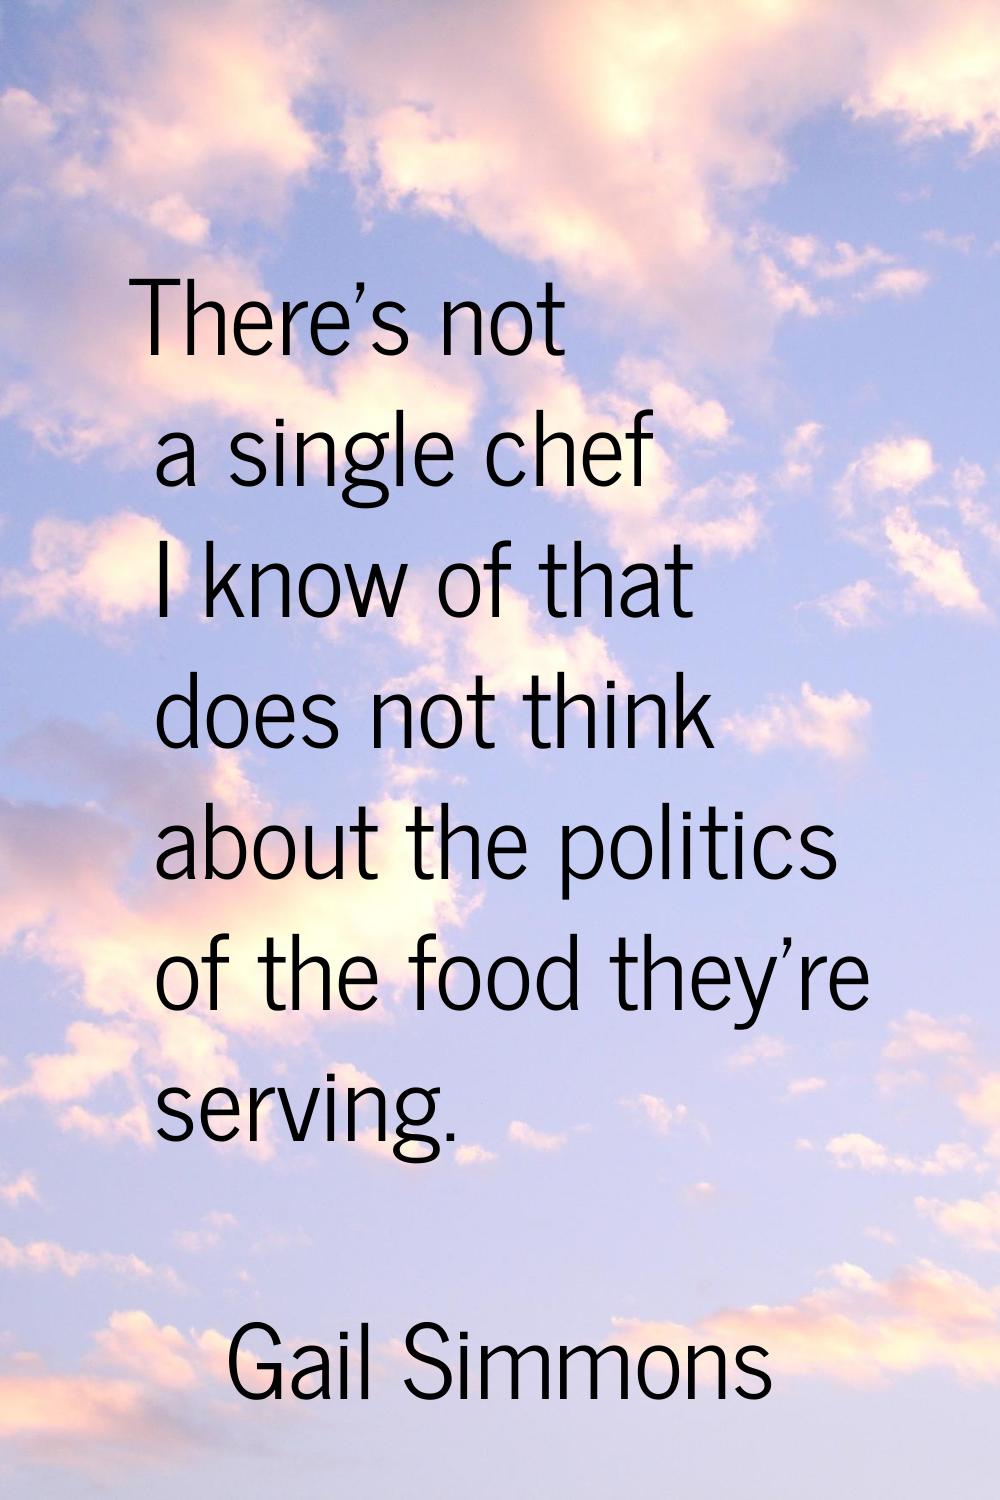 There's not a single chef I know of that does not think about the politics of the food they're serv